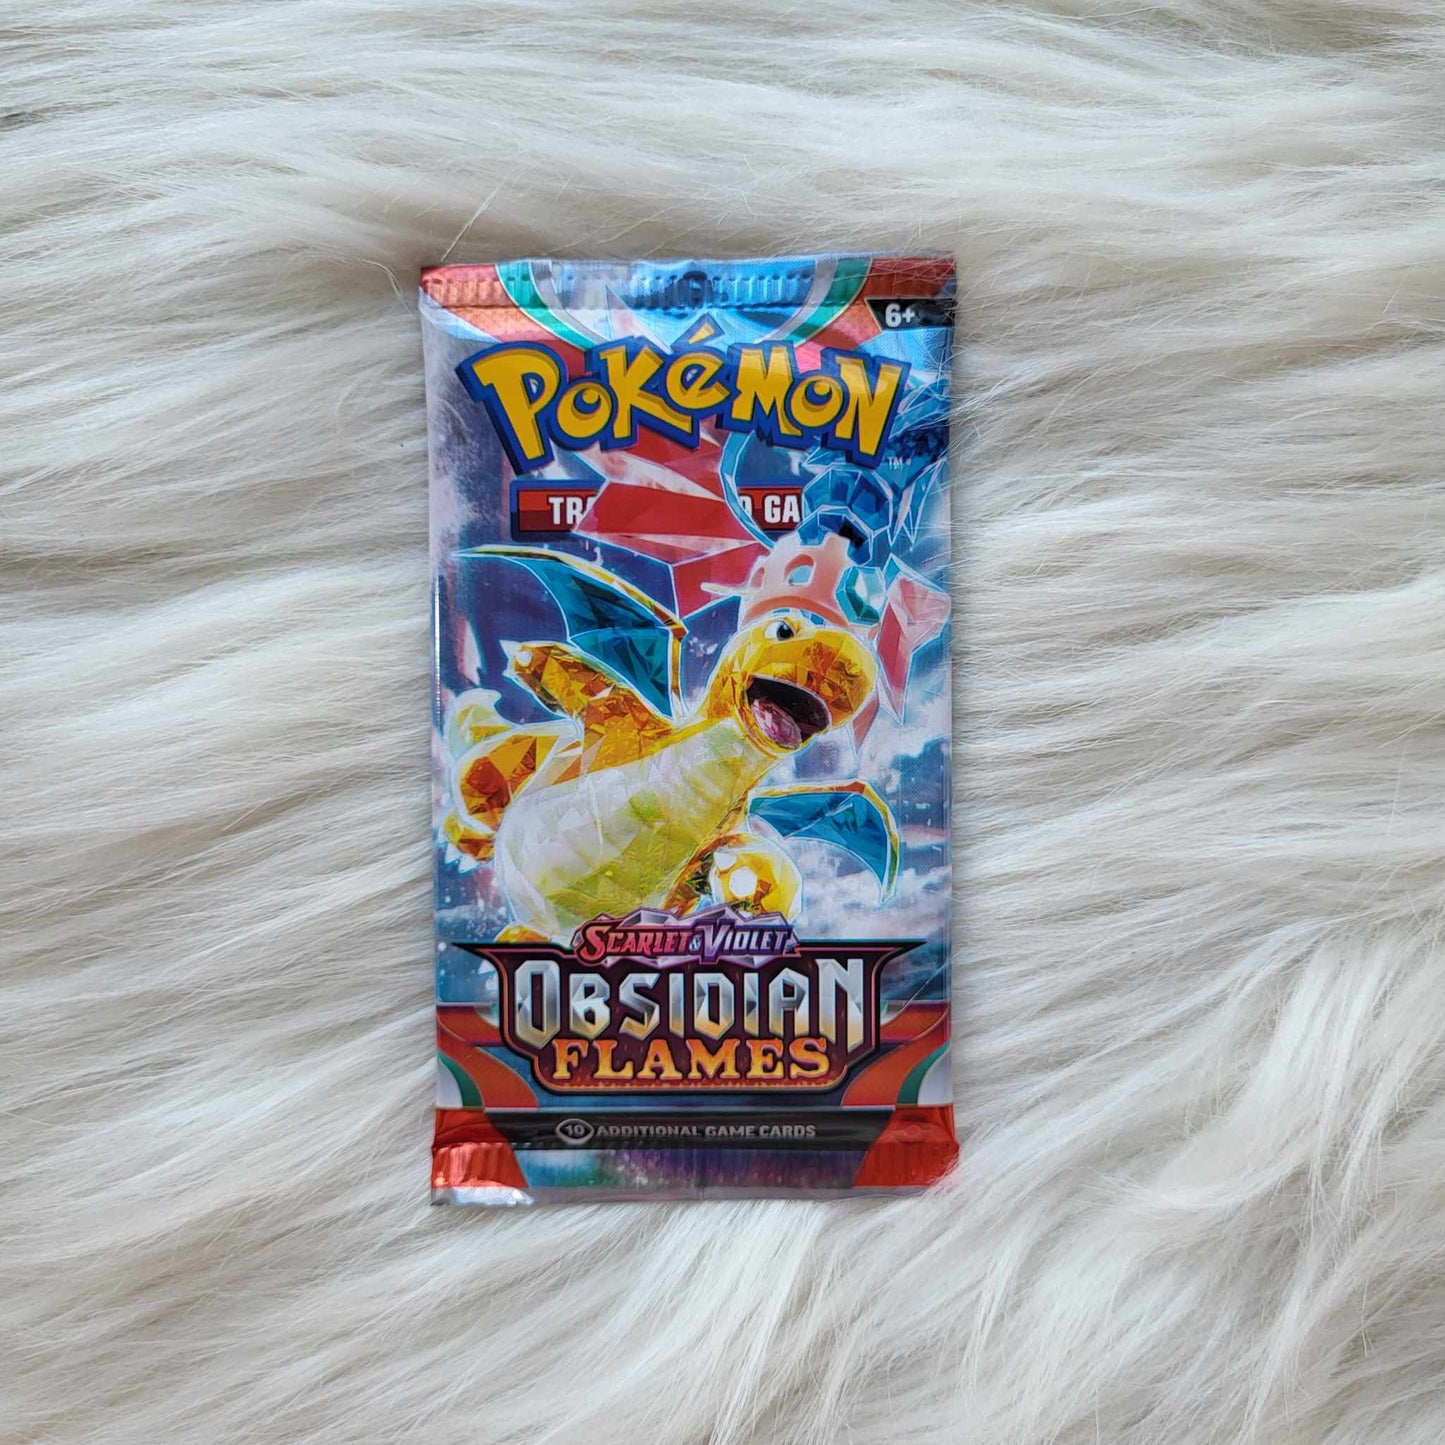 Pokemon booster pack - Obsidian Flames